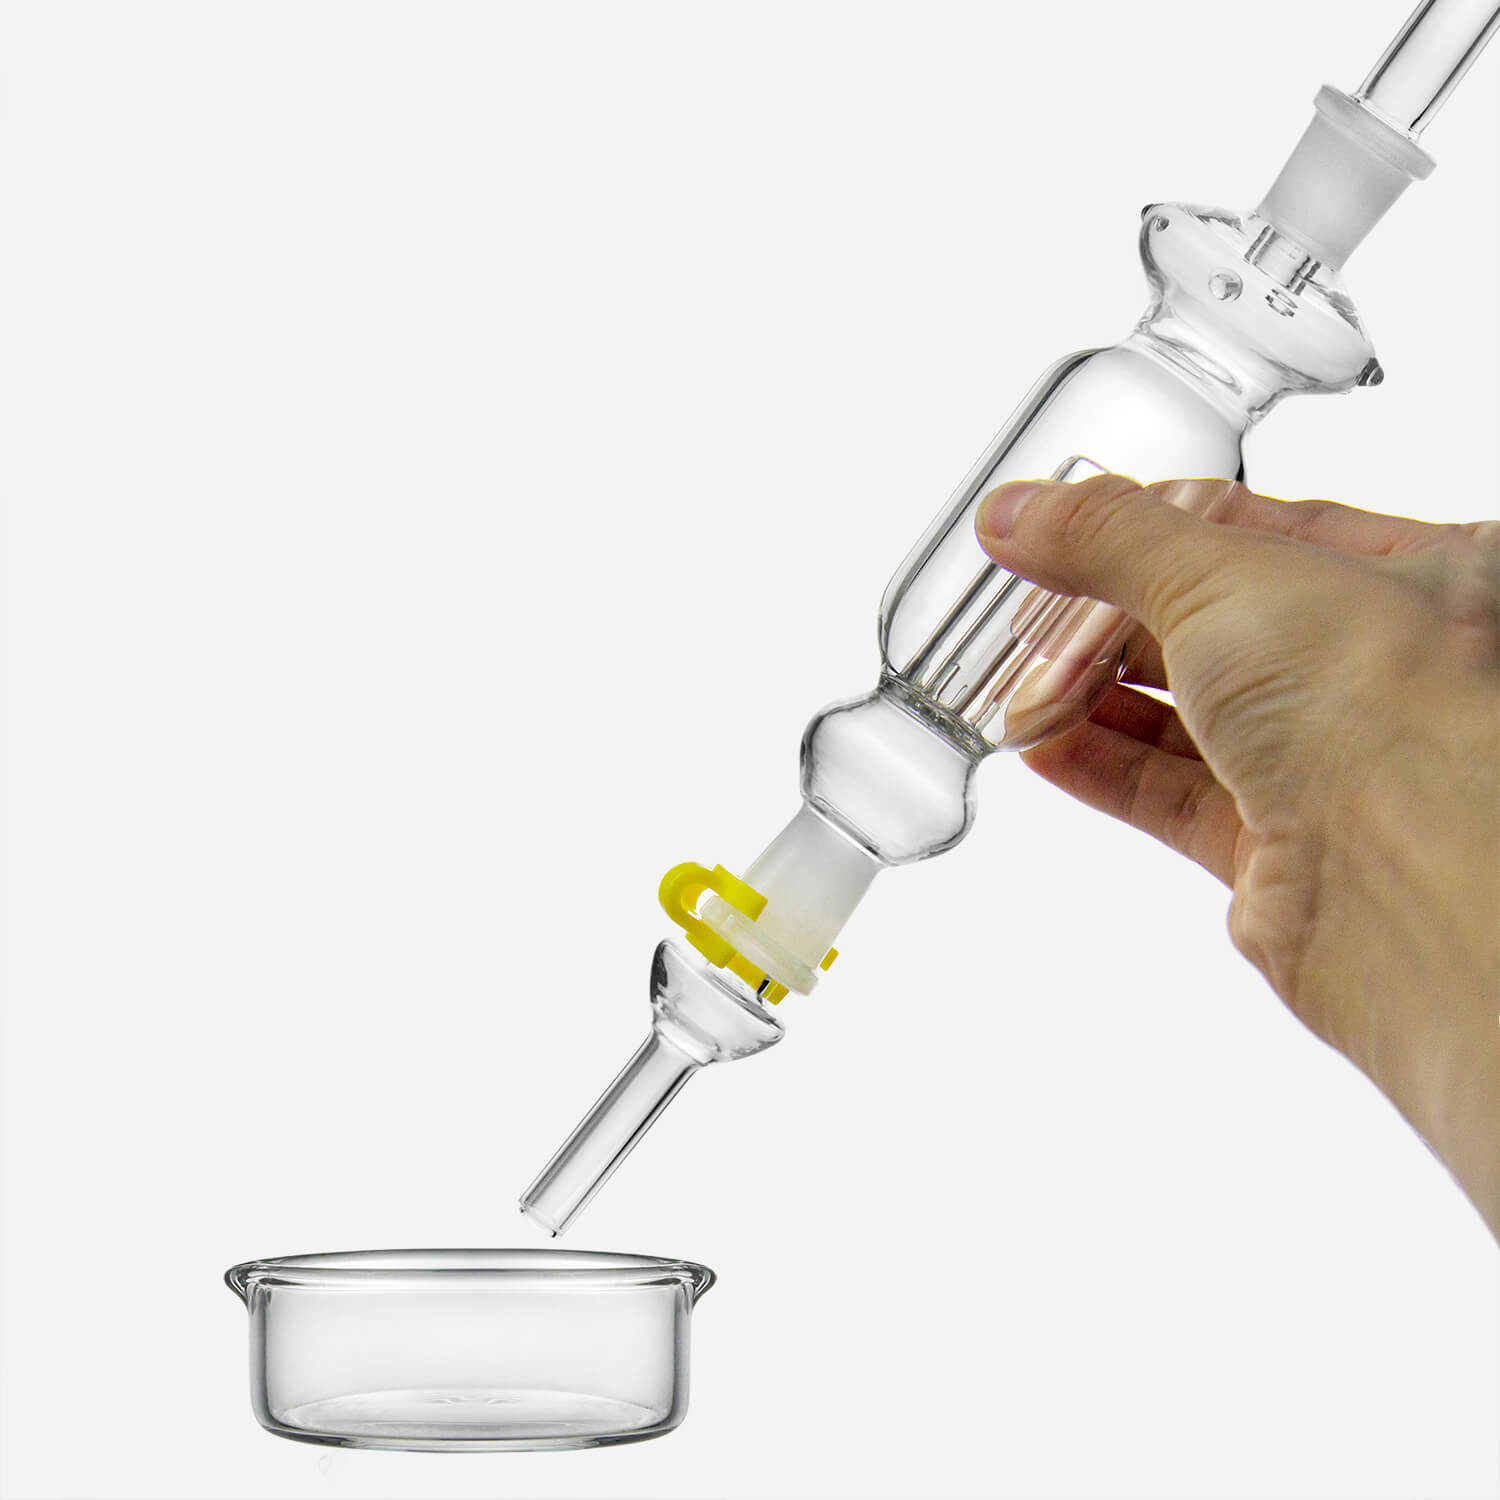 What You Should Know About Using Honey Straw For Dabs – aLeaf Glass